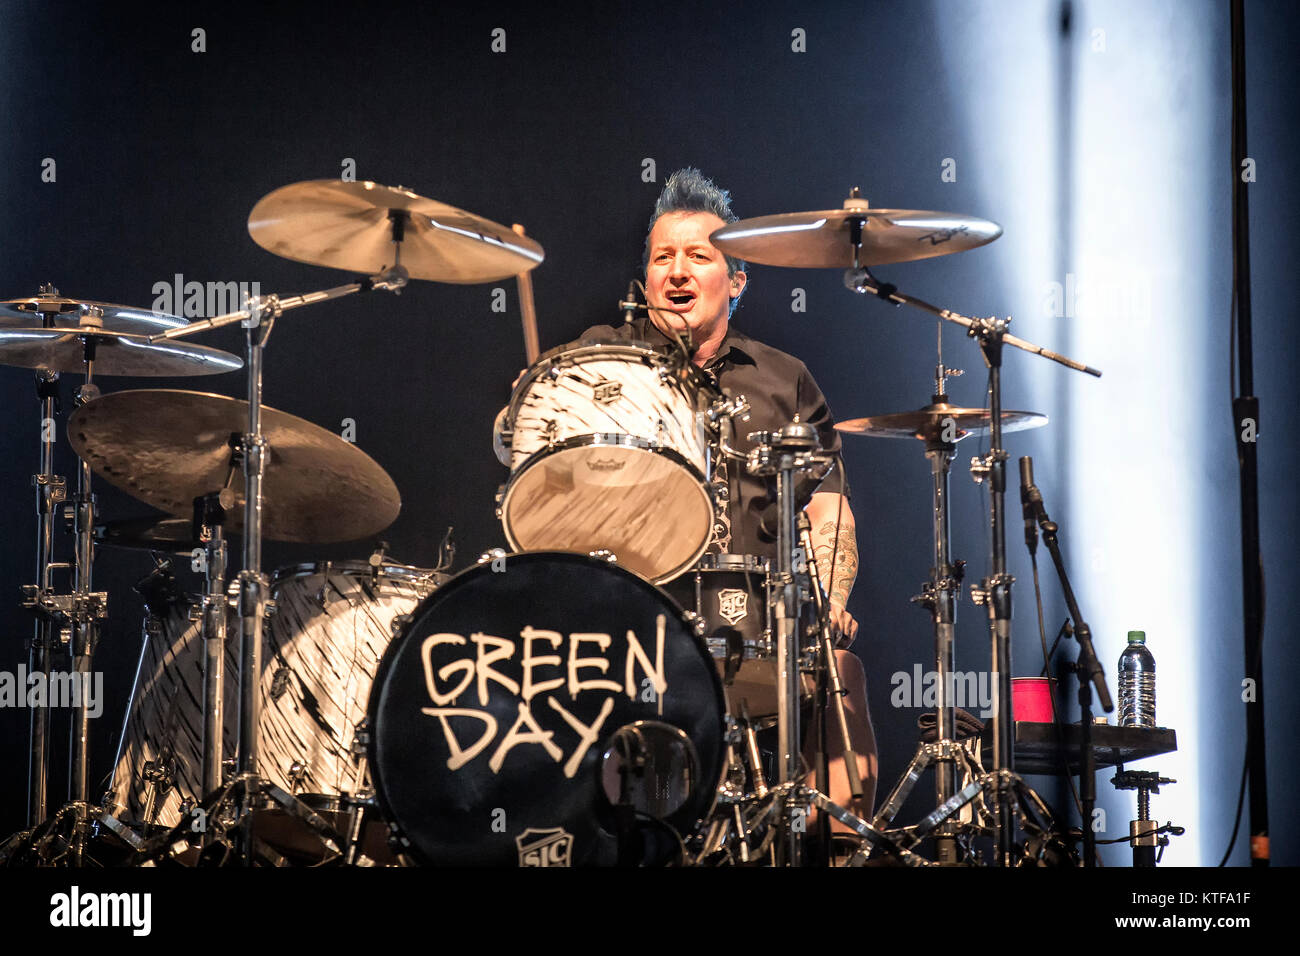 The American punk rock band Green Day performs a live concert at Oslo Spektrum. Here drummer Tré Cool is seen live on stage. Norway, 25/01 2017. Stock Photo